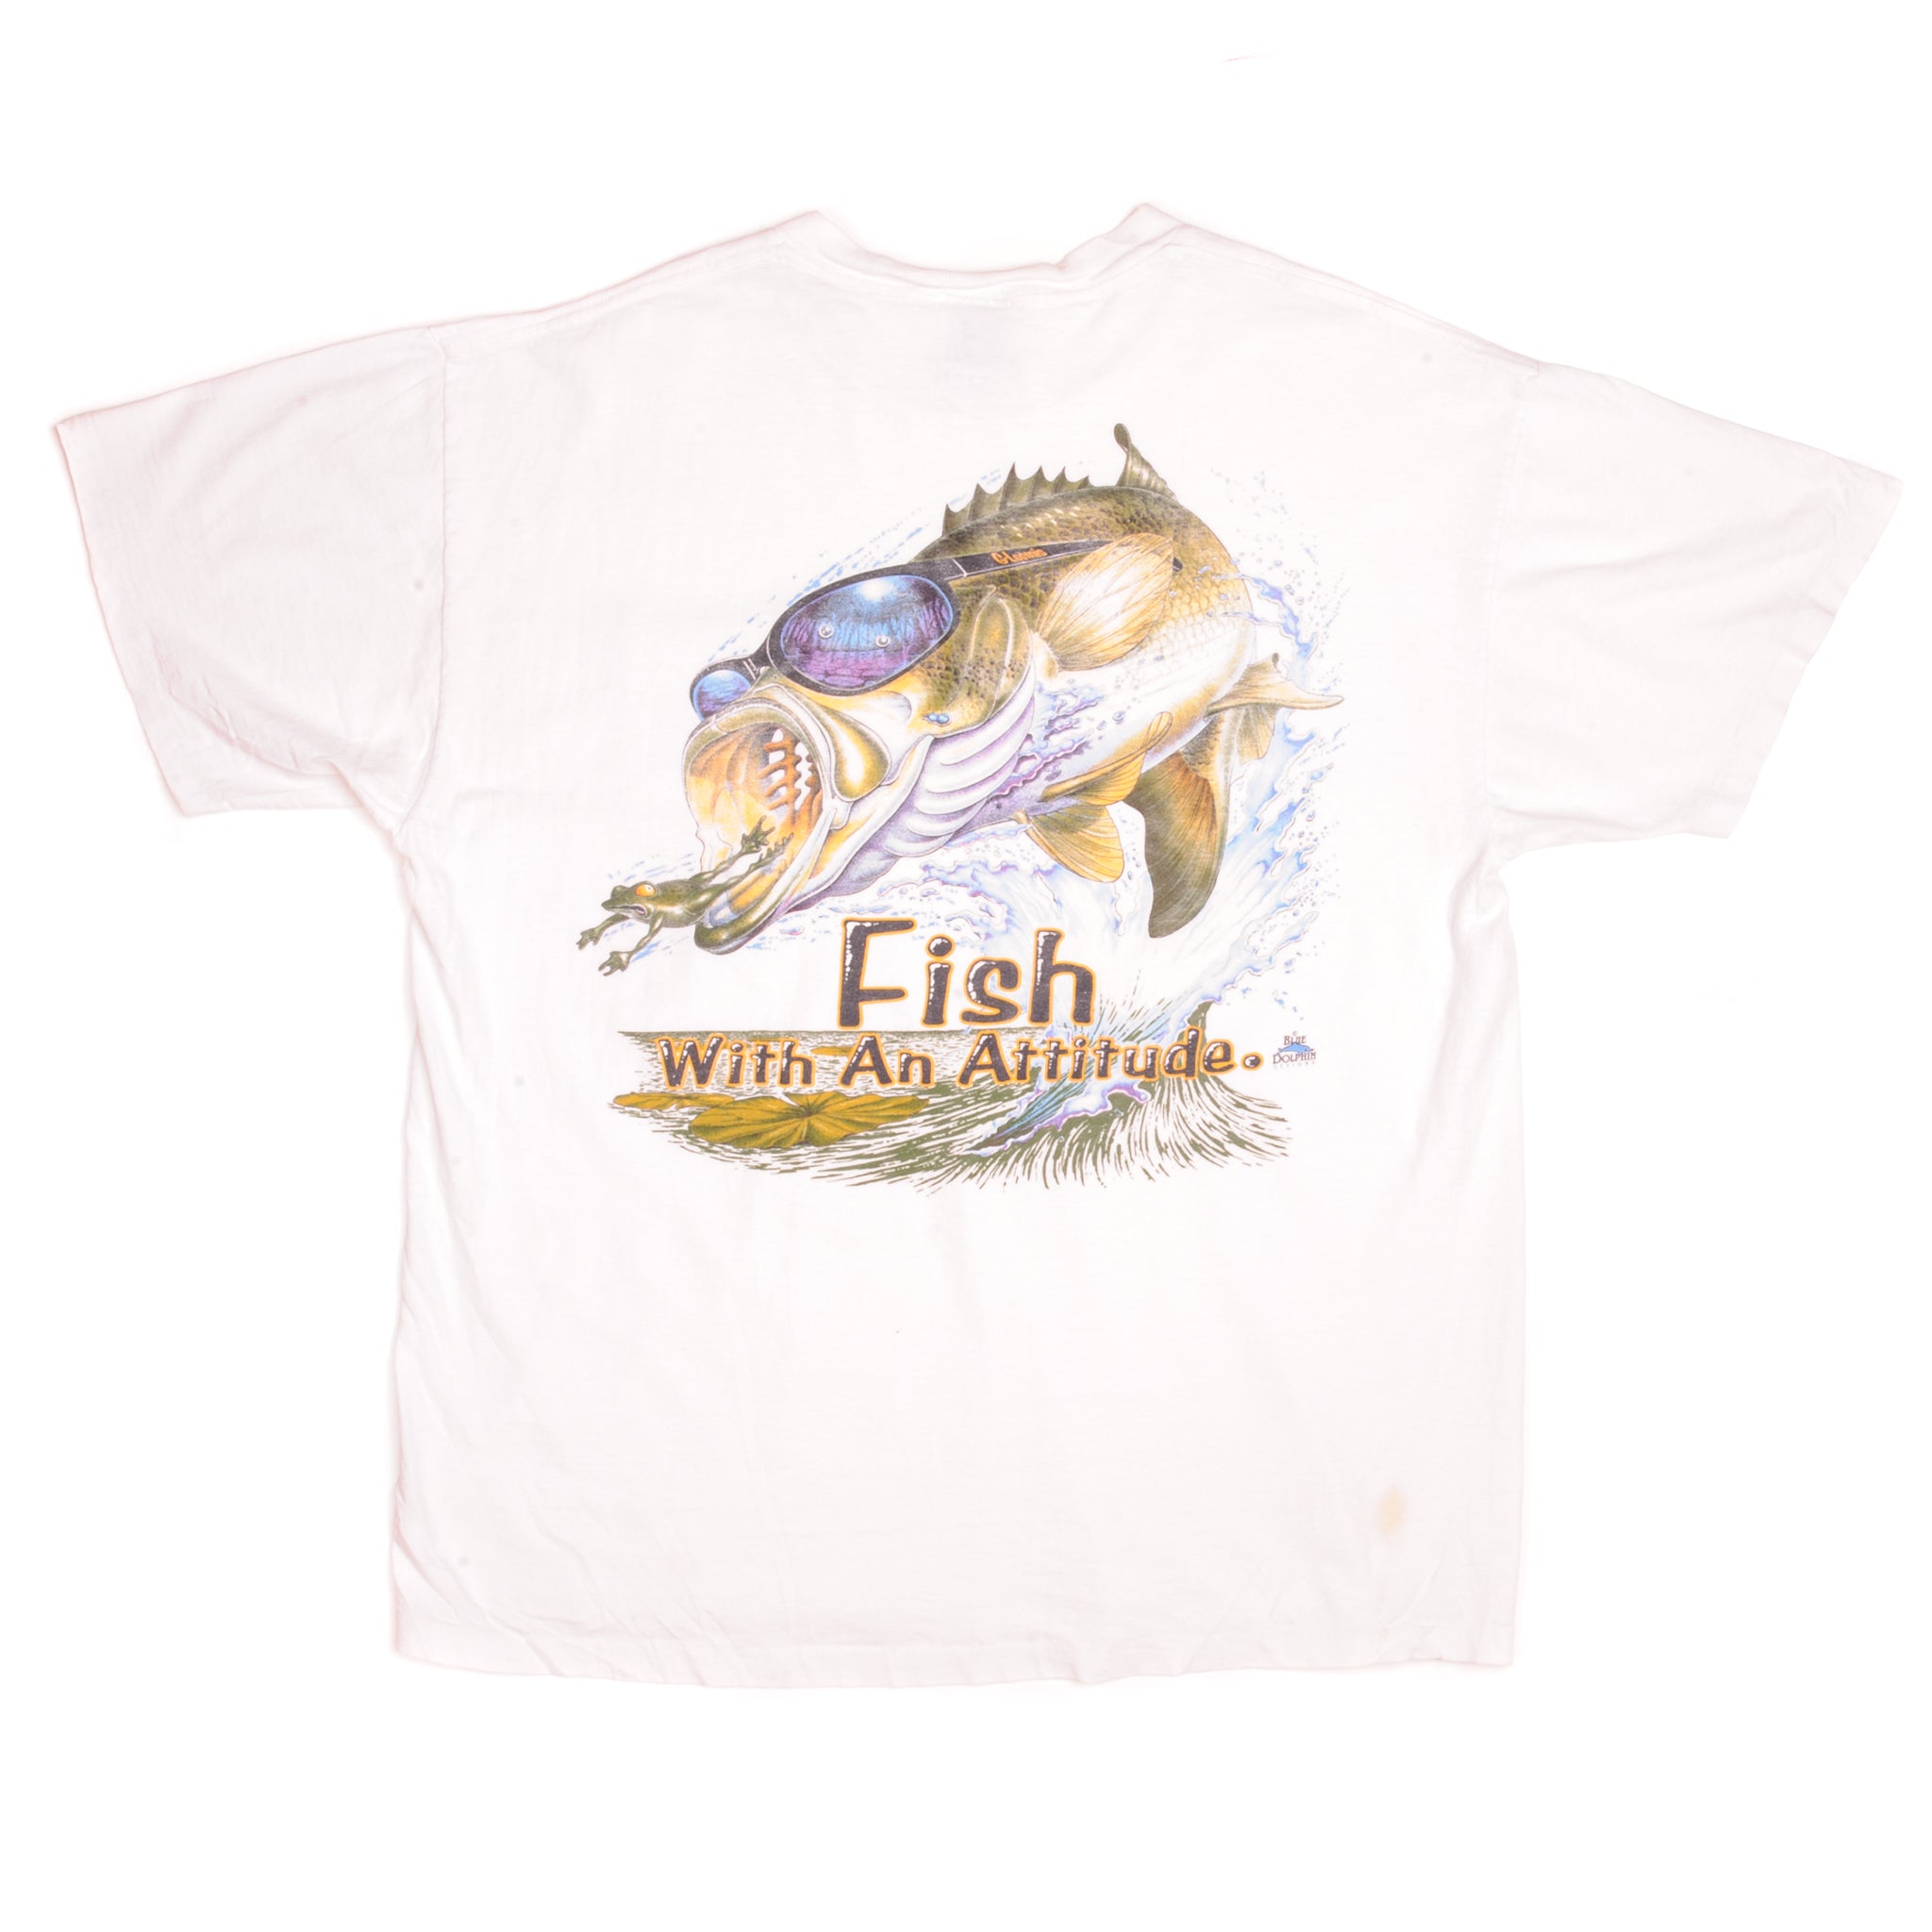 Vintage G. Loomis Fish with An Attitude Tee Shirt 90s Size XL